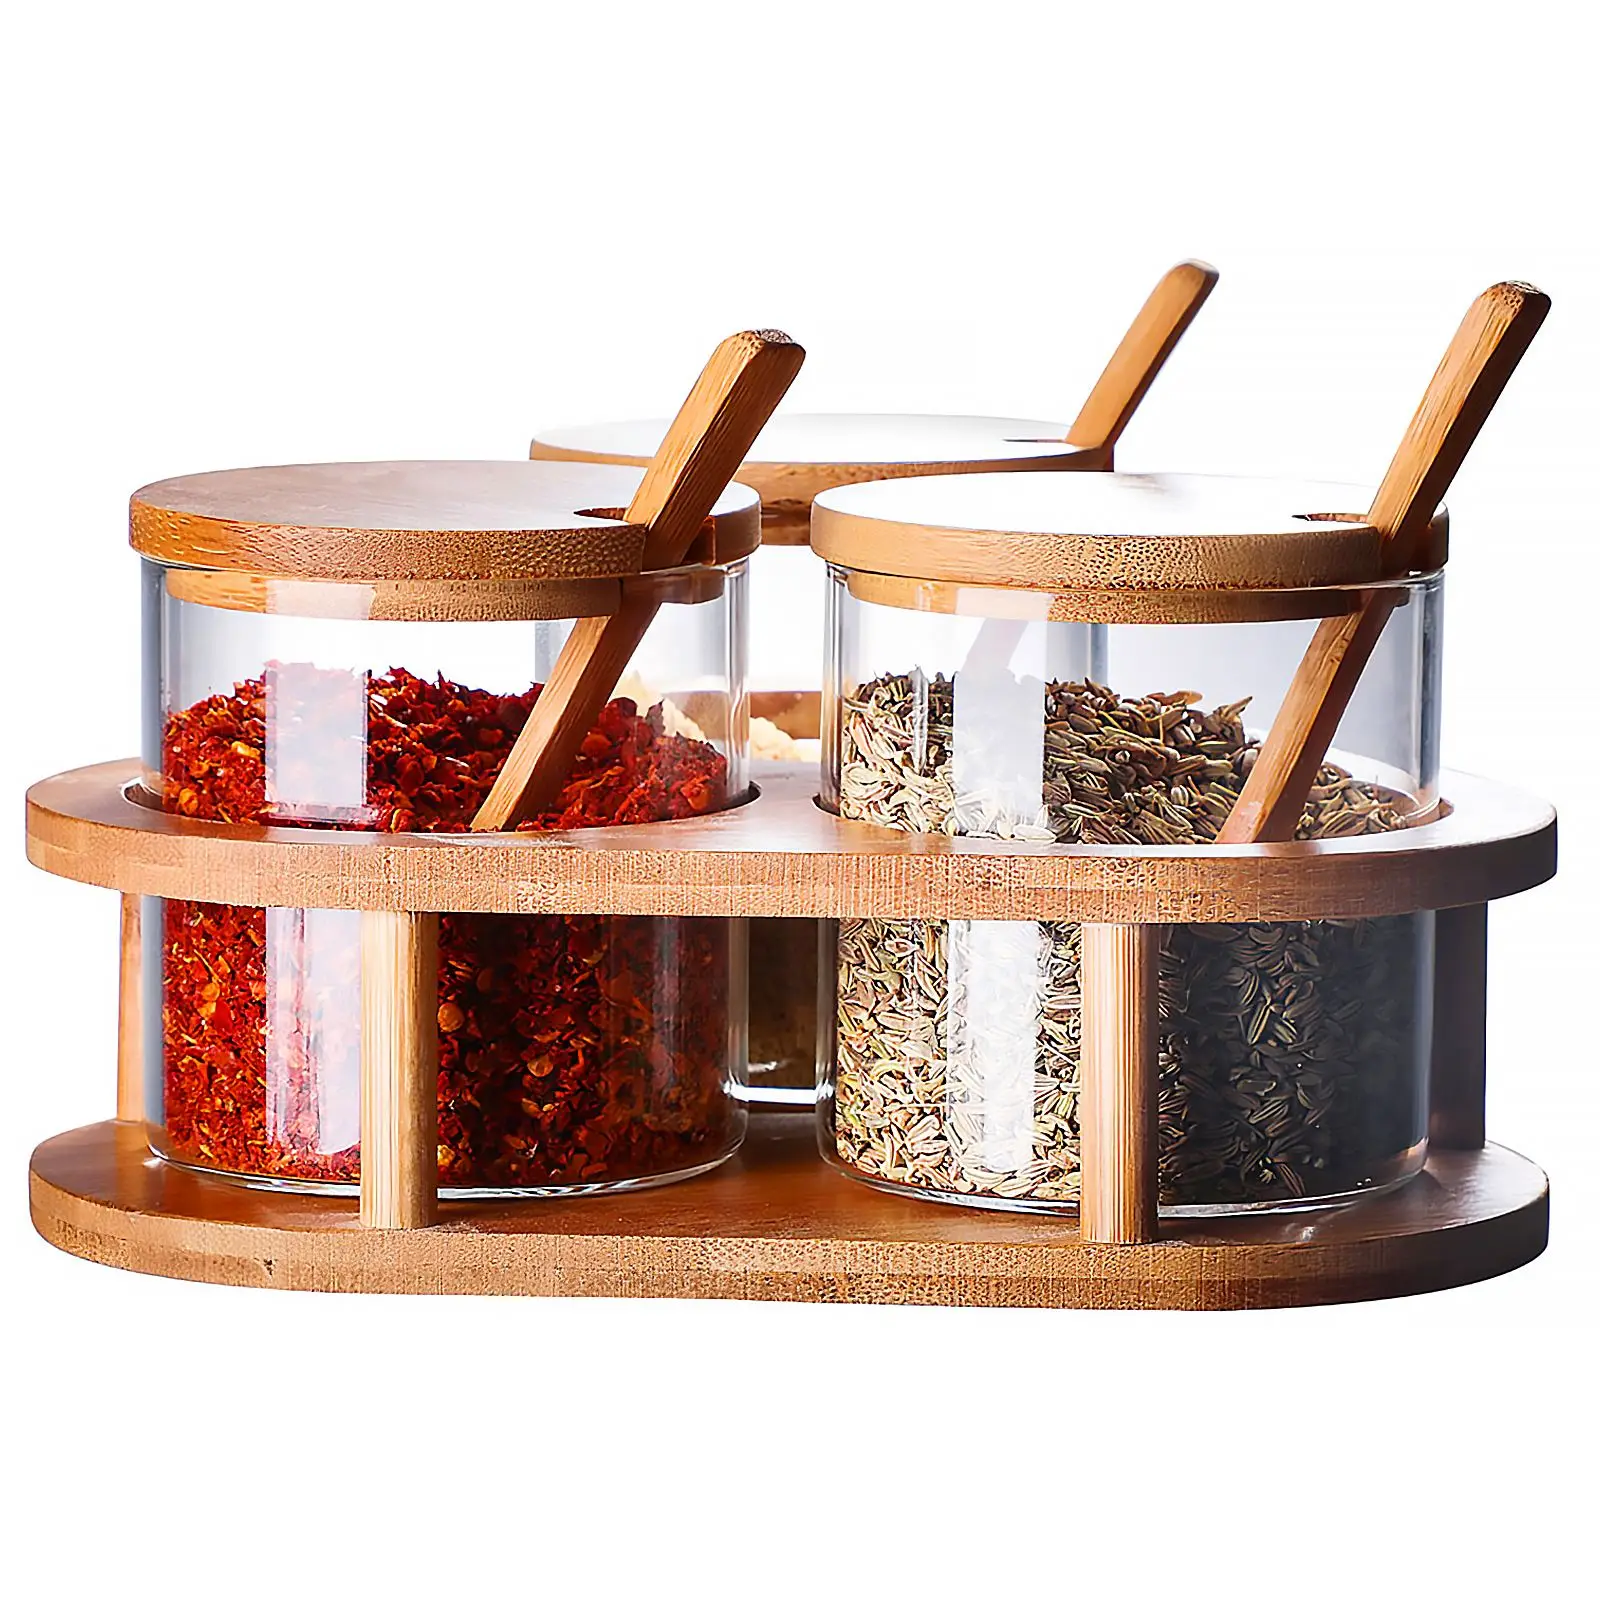 

3 Condiment Jars with Lids & Spoons Spice Container Set with Wooden Base Multipurpose Seasoning Jar for Home Kitchen Restaurant